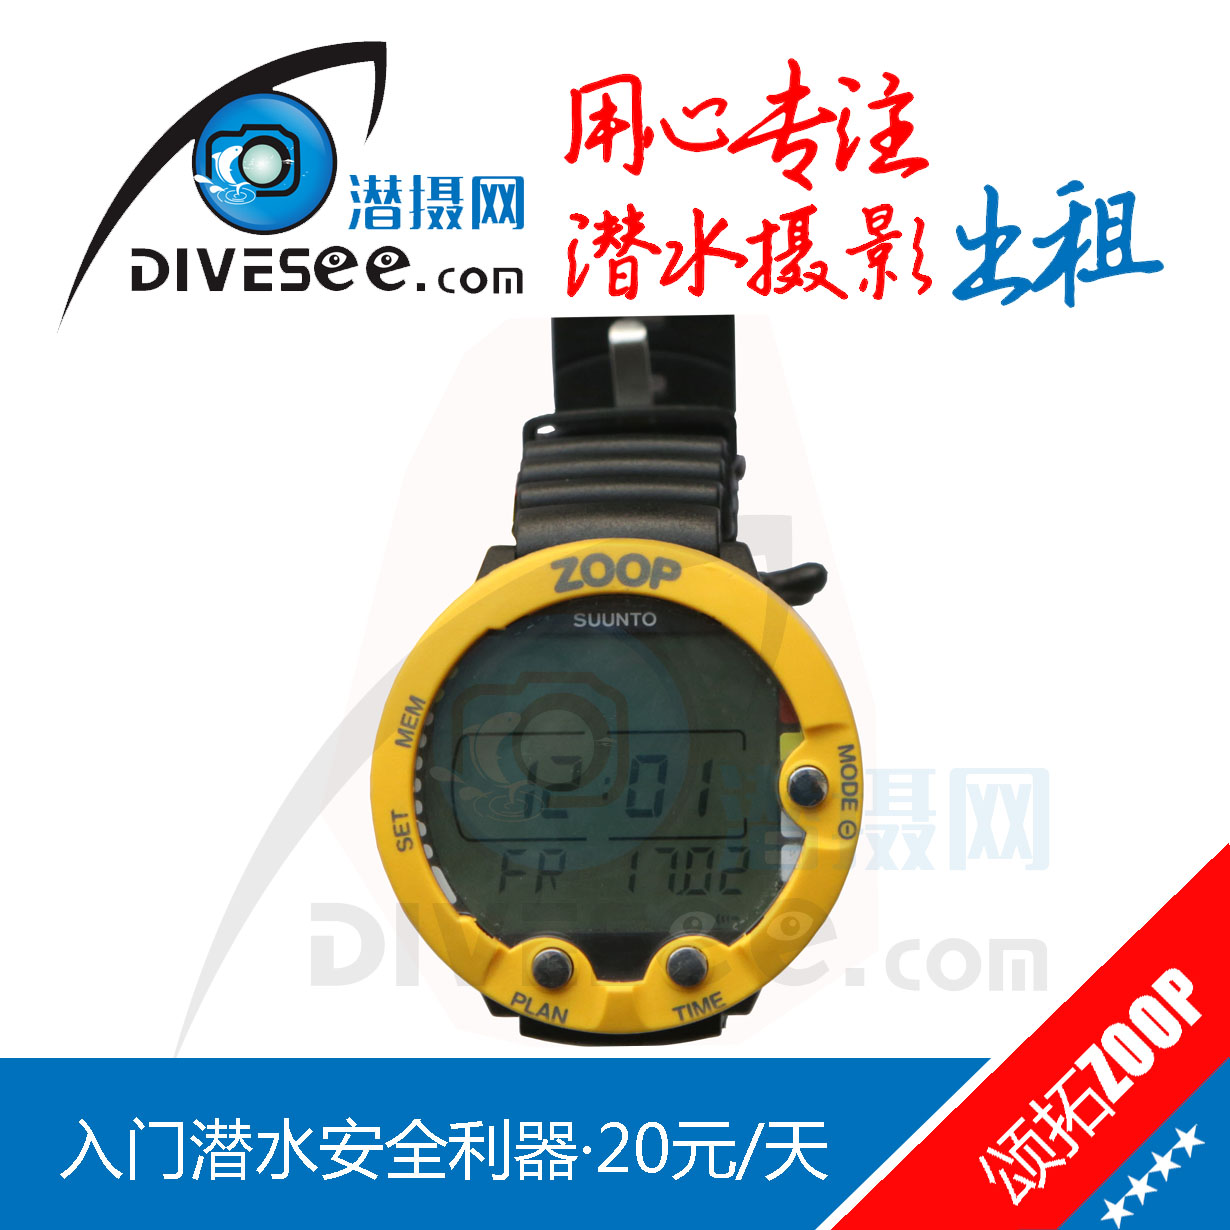 [Secondhand products][sunny rental] Suunto/ song Tuo ZOOP entry level diving computer table rental rental Chengdu